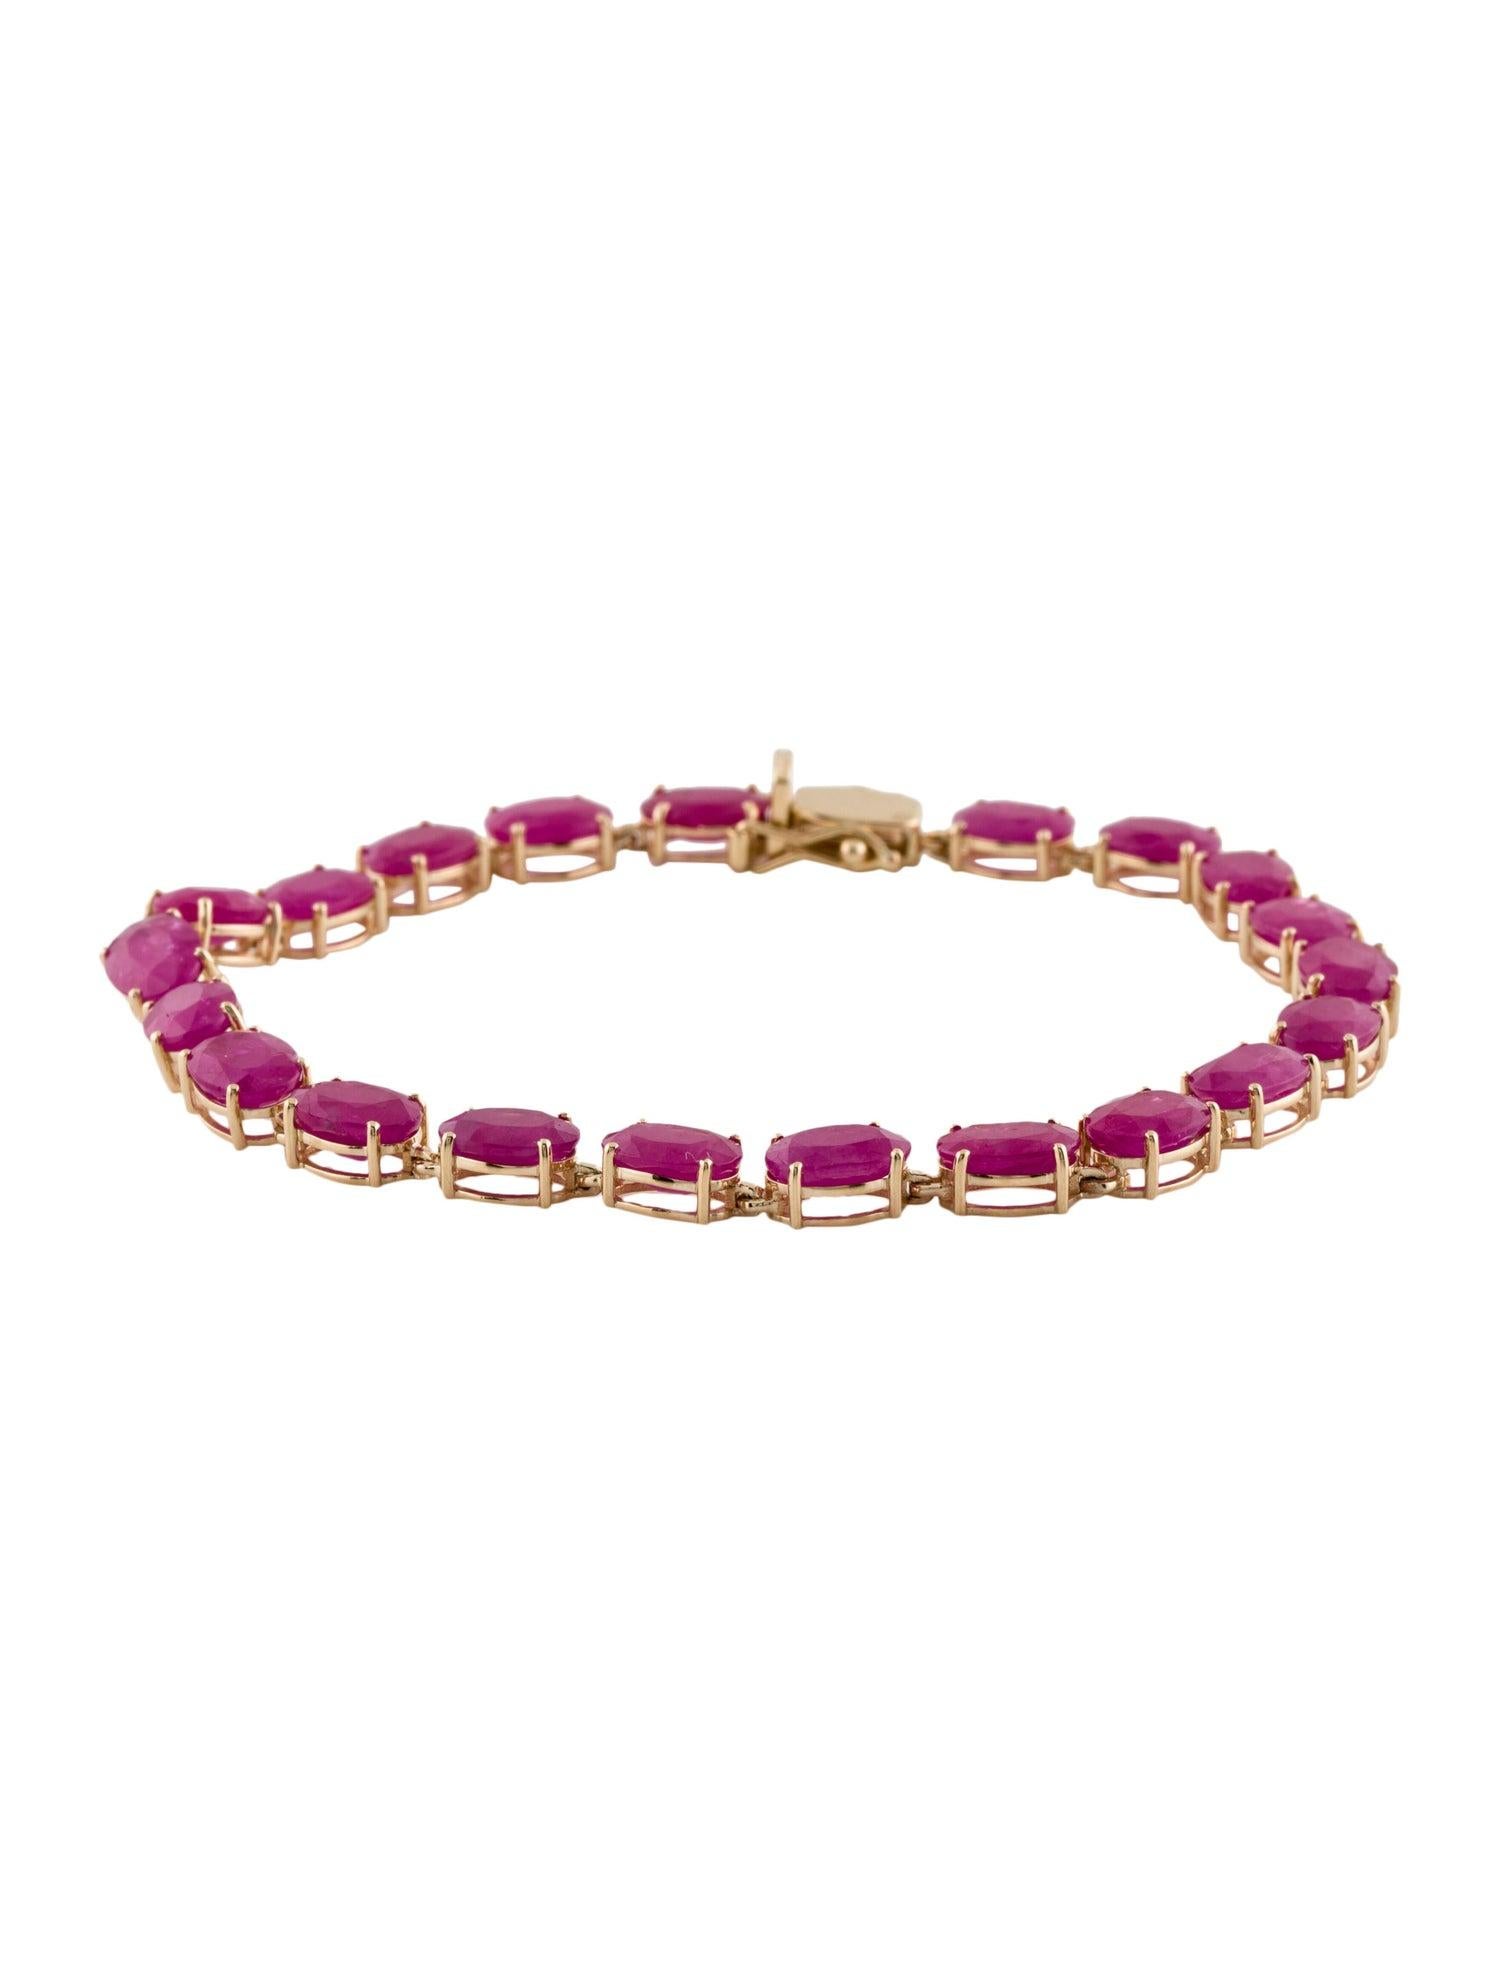 Elegance and passion intertwine in the exquisite Blooms of Passion Ruby Bracelet by Jeweltique. Crafted with the utmost care and a dedication to capturing nature's vibrant beauty, this bracelet is more than just a piece of jewelry – it's a testament